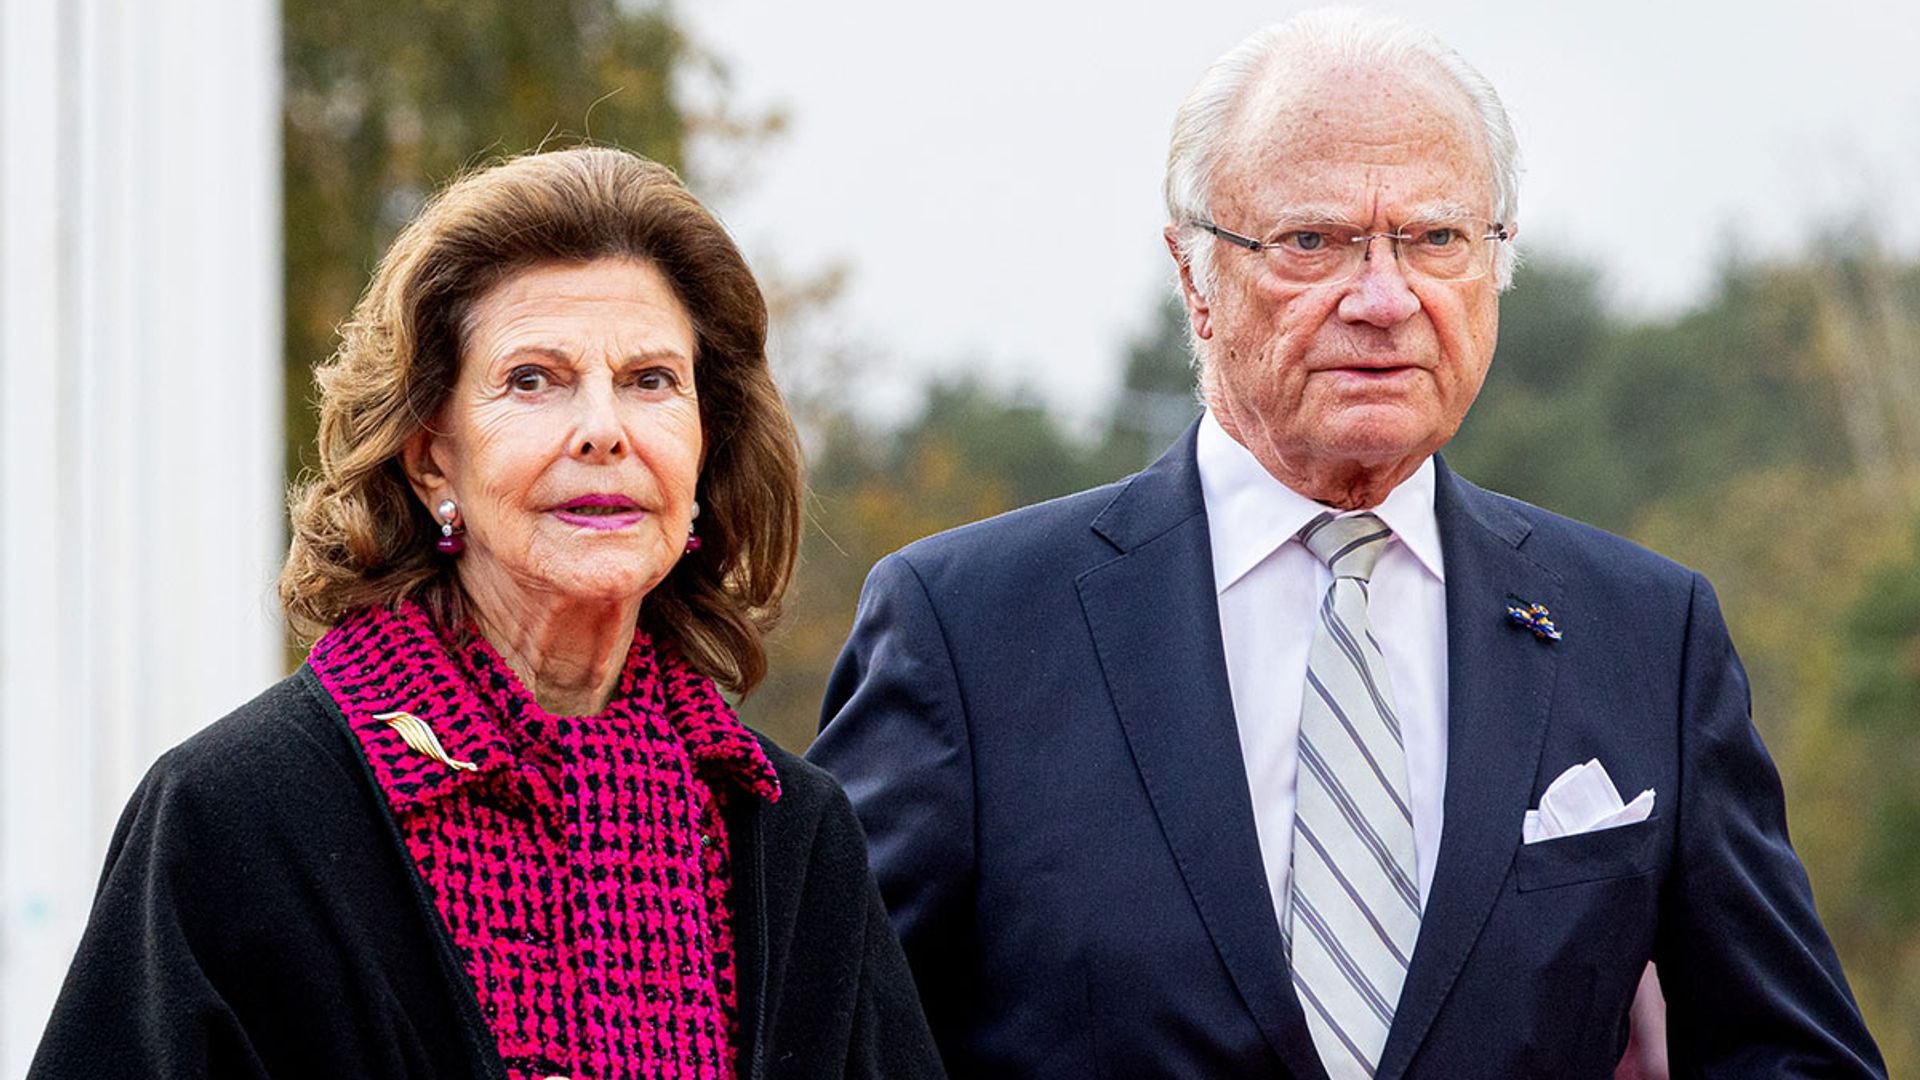 King Carl XVI Gustaf of Sweden Marks 50th Year of Reign with New